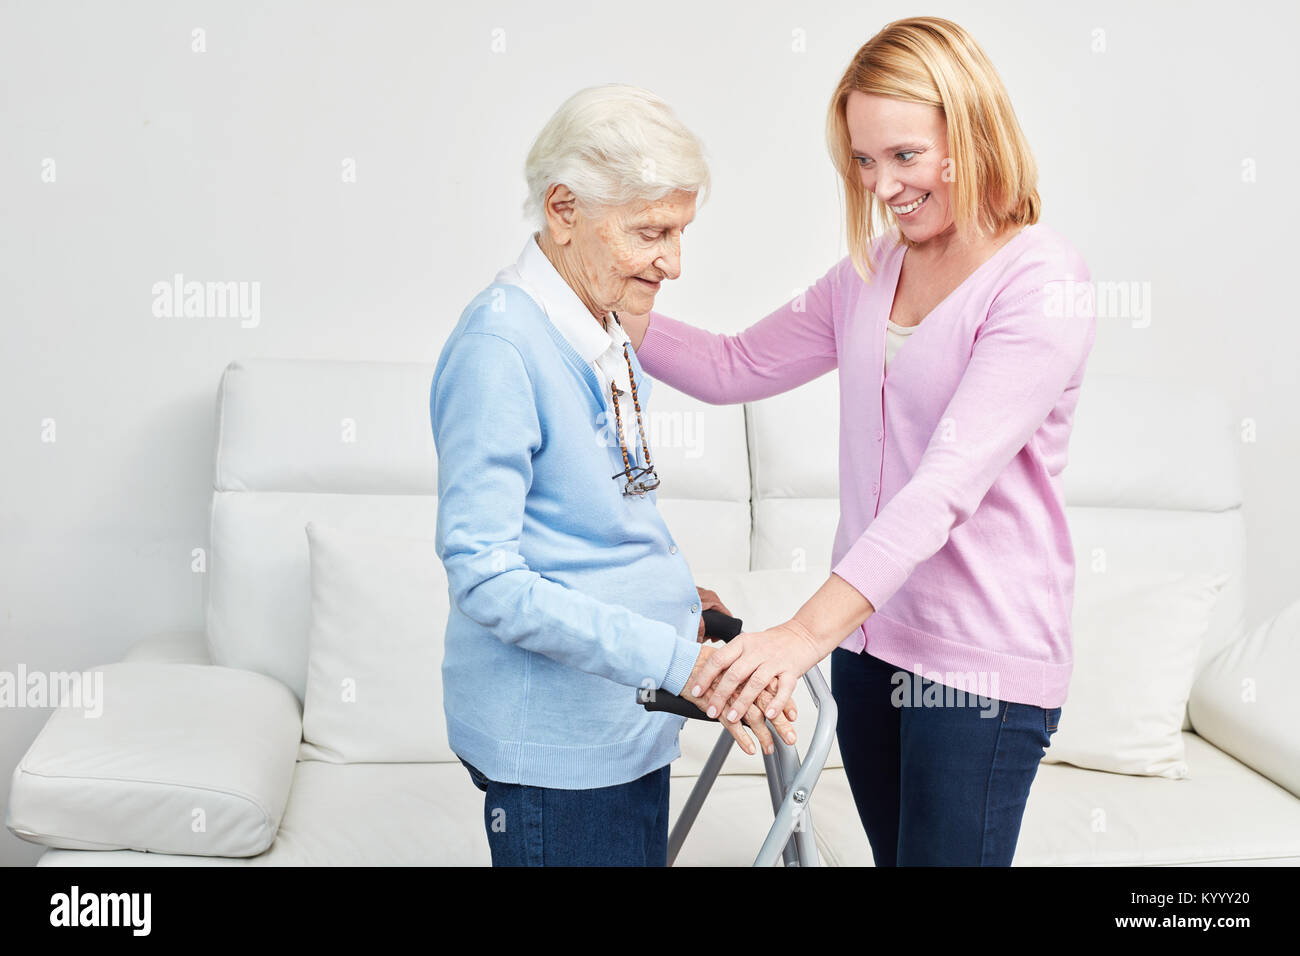 Young woman as a daughter taking care of elderly woman as a mother at home Stock Photo